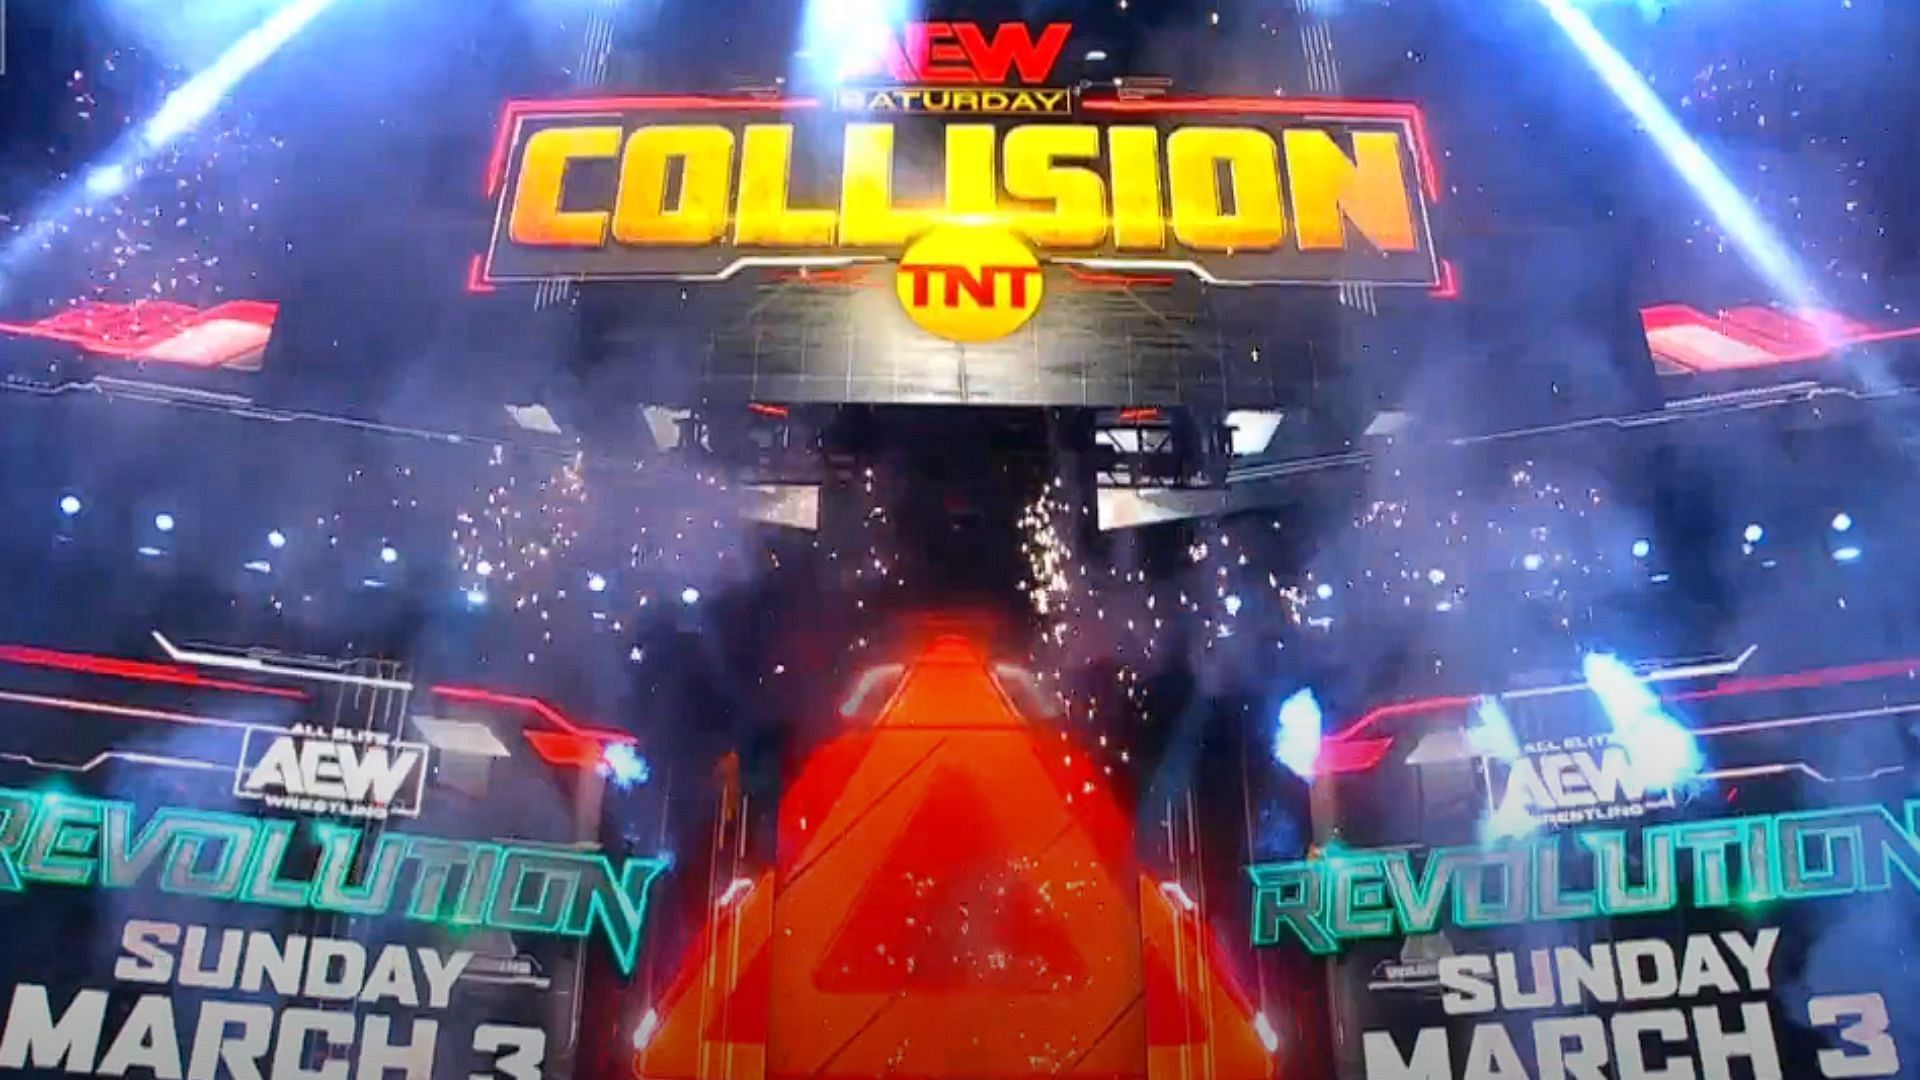 AEW Collision is the Saturday show of All Elite Wrestling [Photo courtesy of screenshot from Triller TV